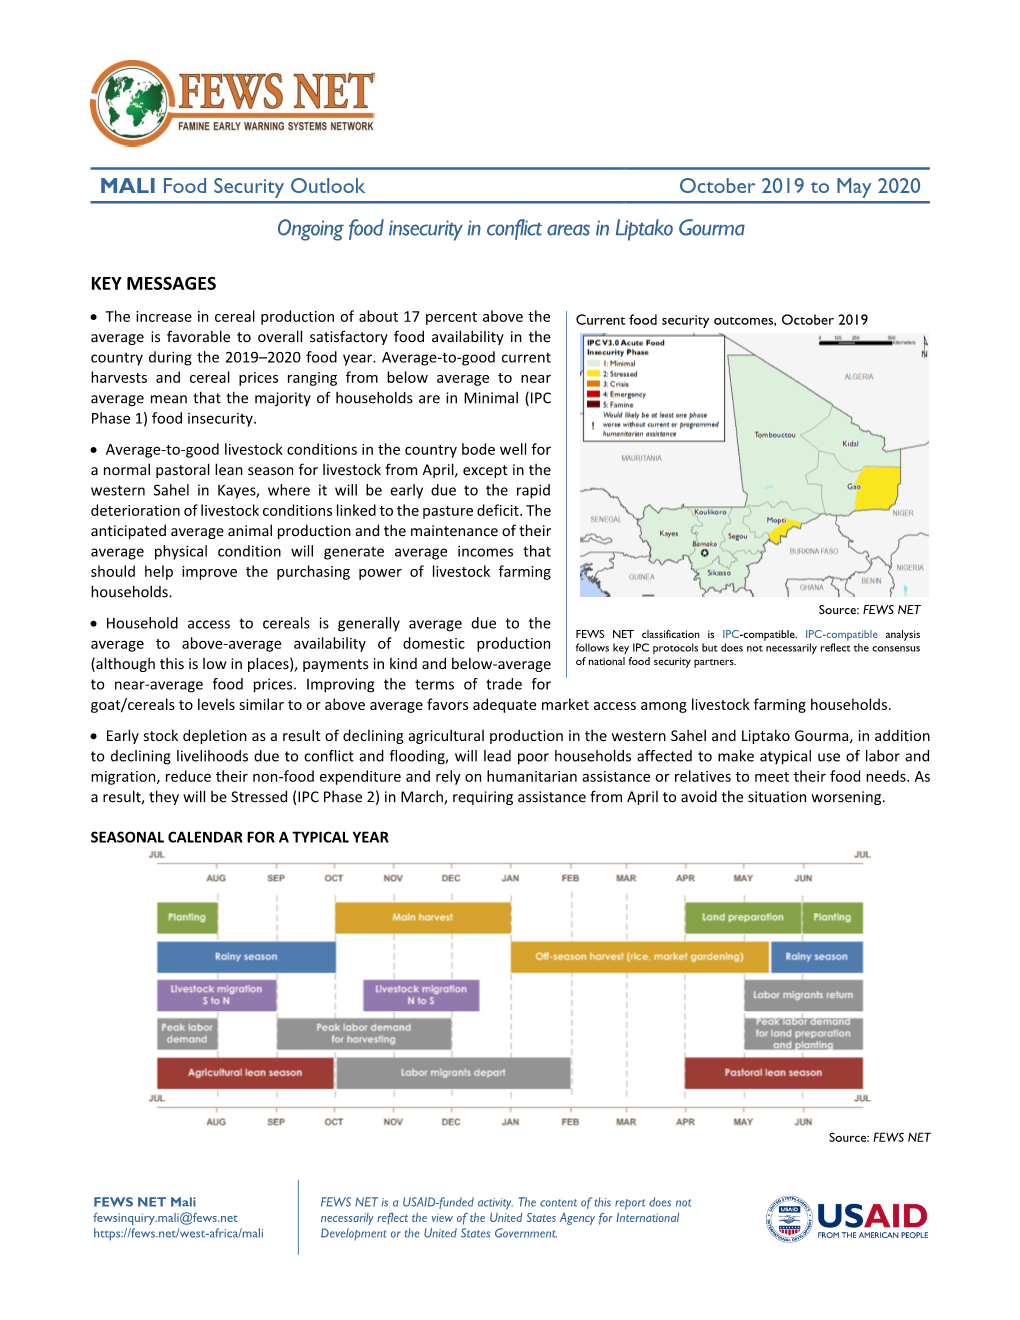 For More Information, See the Mali Food Security Outlook for October